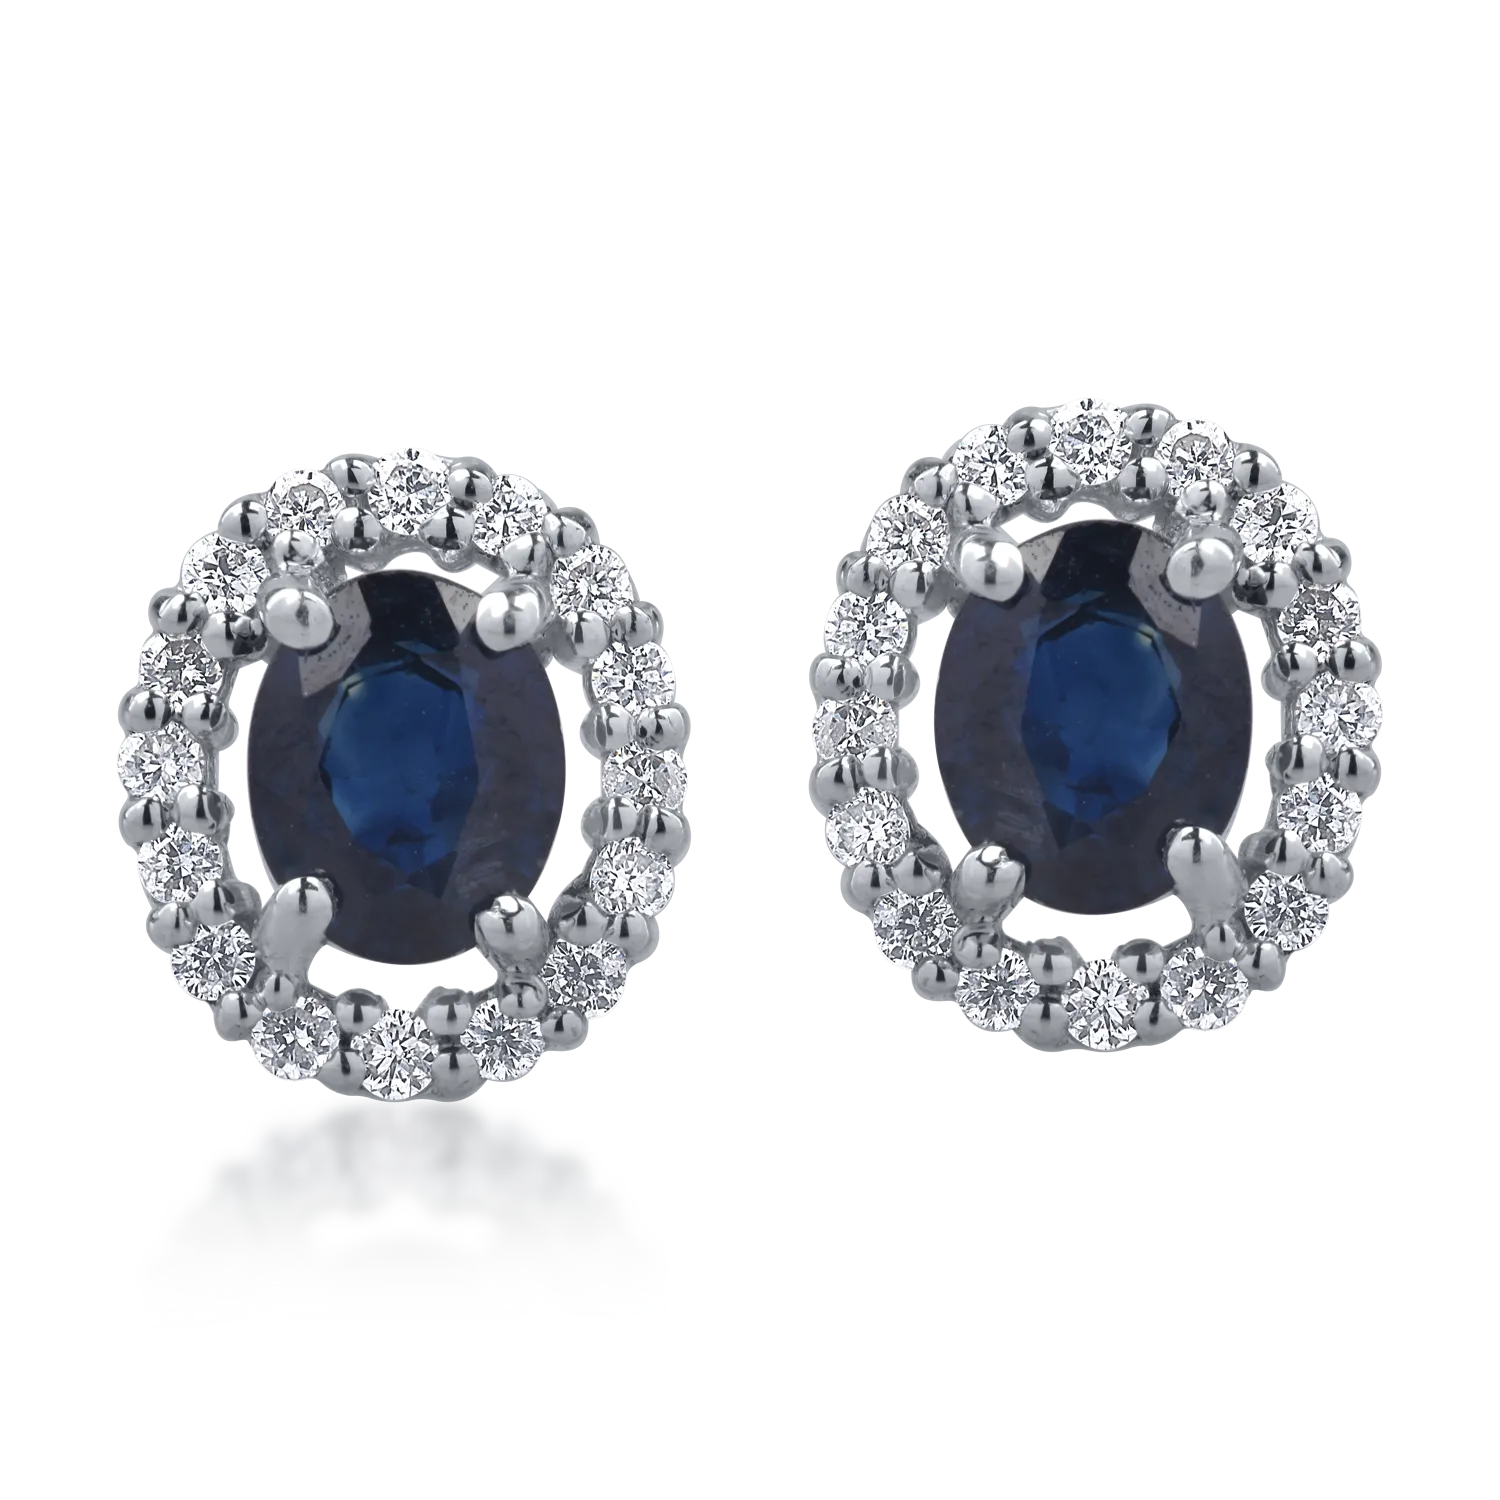 White gold earrings with 0.86ct sapphires and 0.16ct diamonds